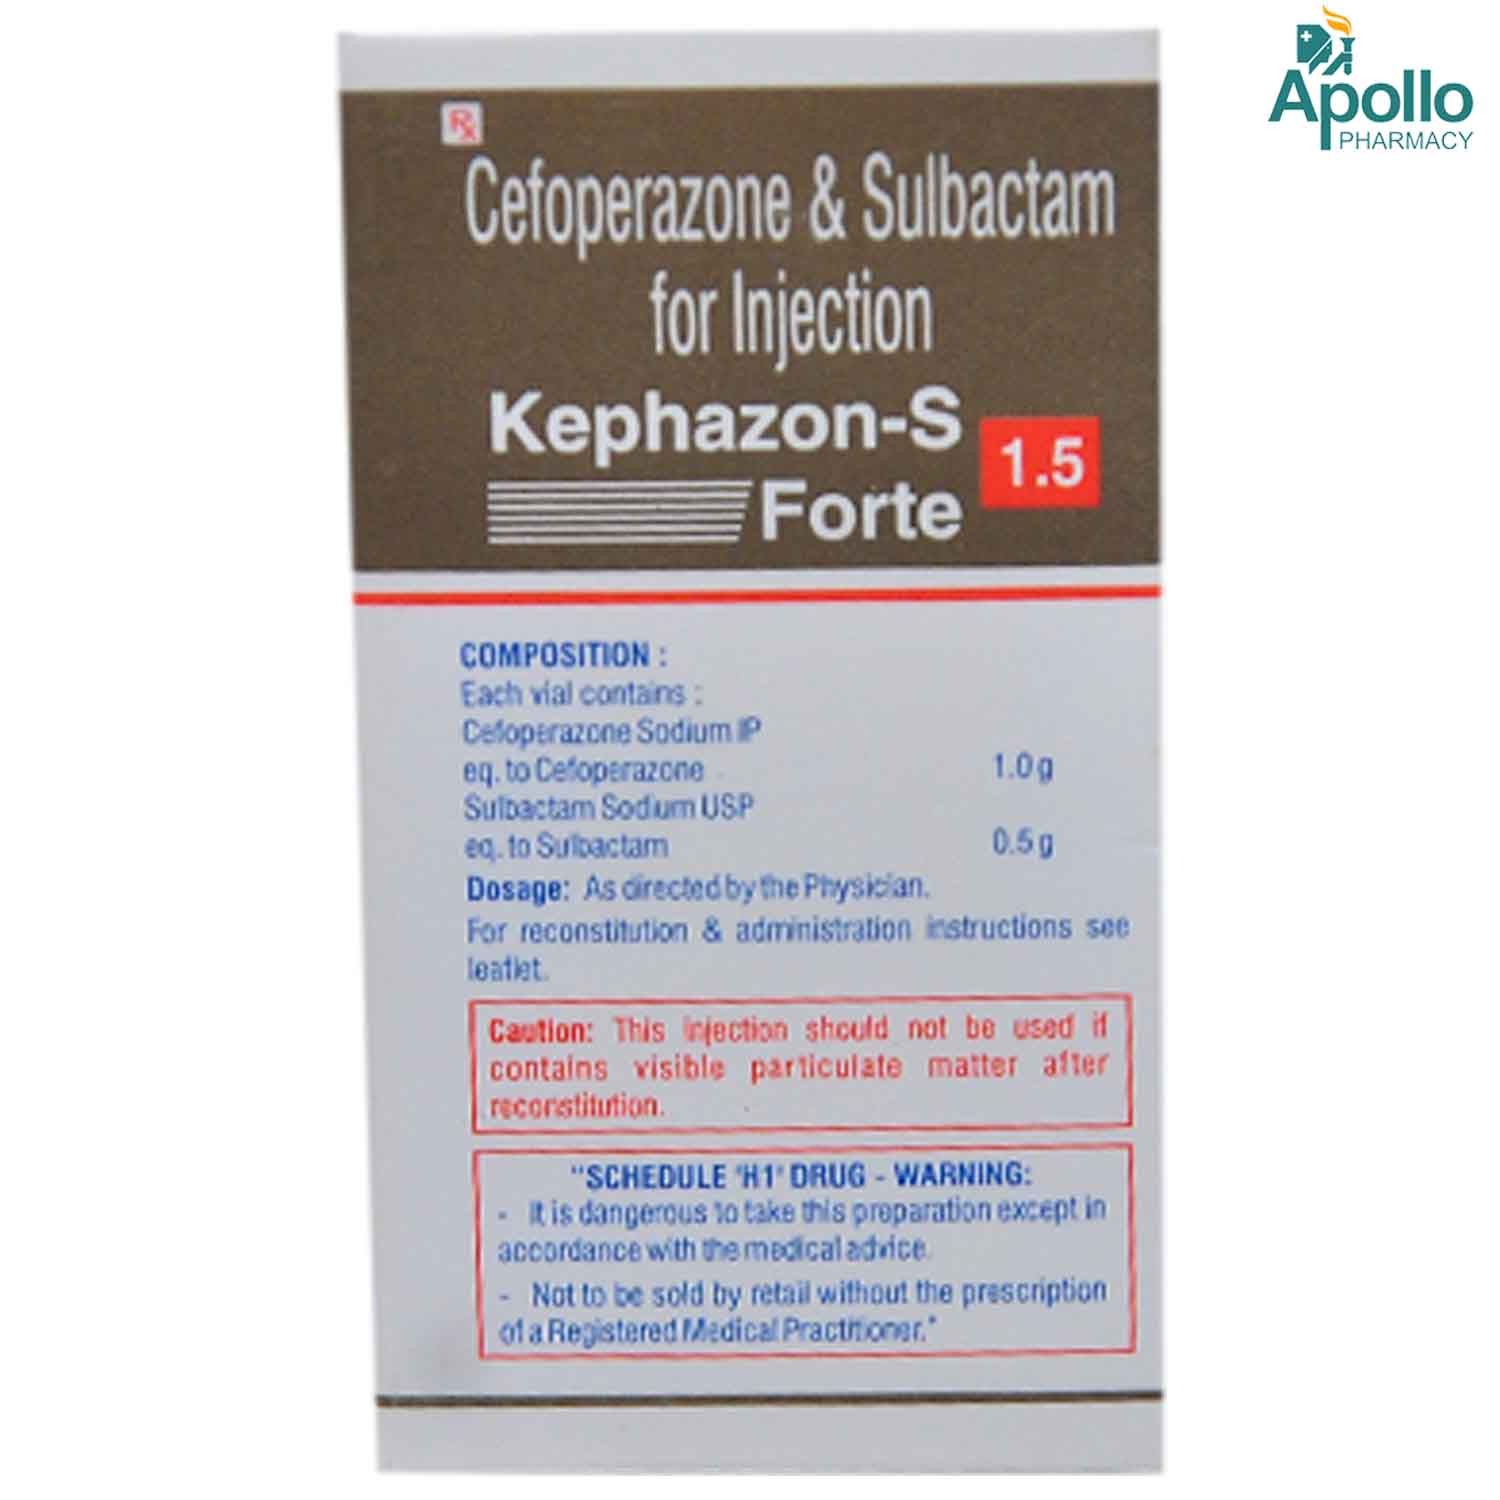 Kephazons Forte Injection 1 50gm Price Uses Side Effects Composition Apollo Pharmacy